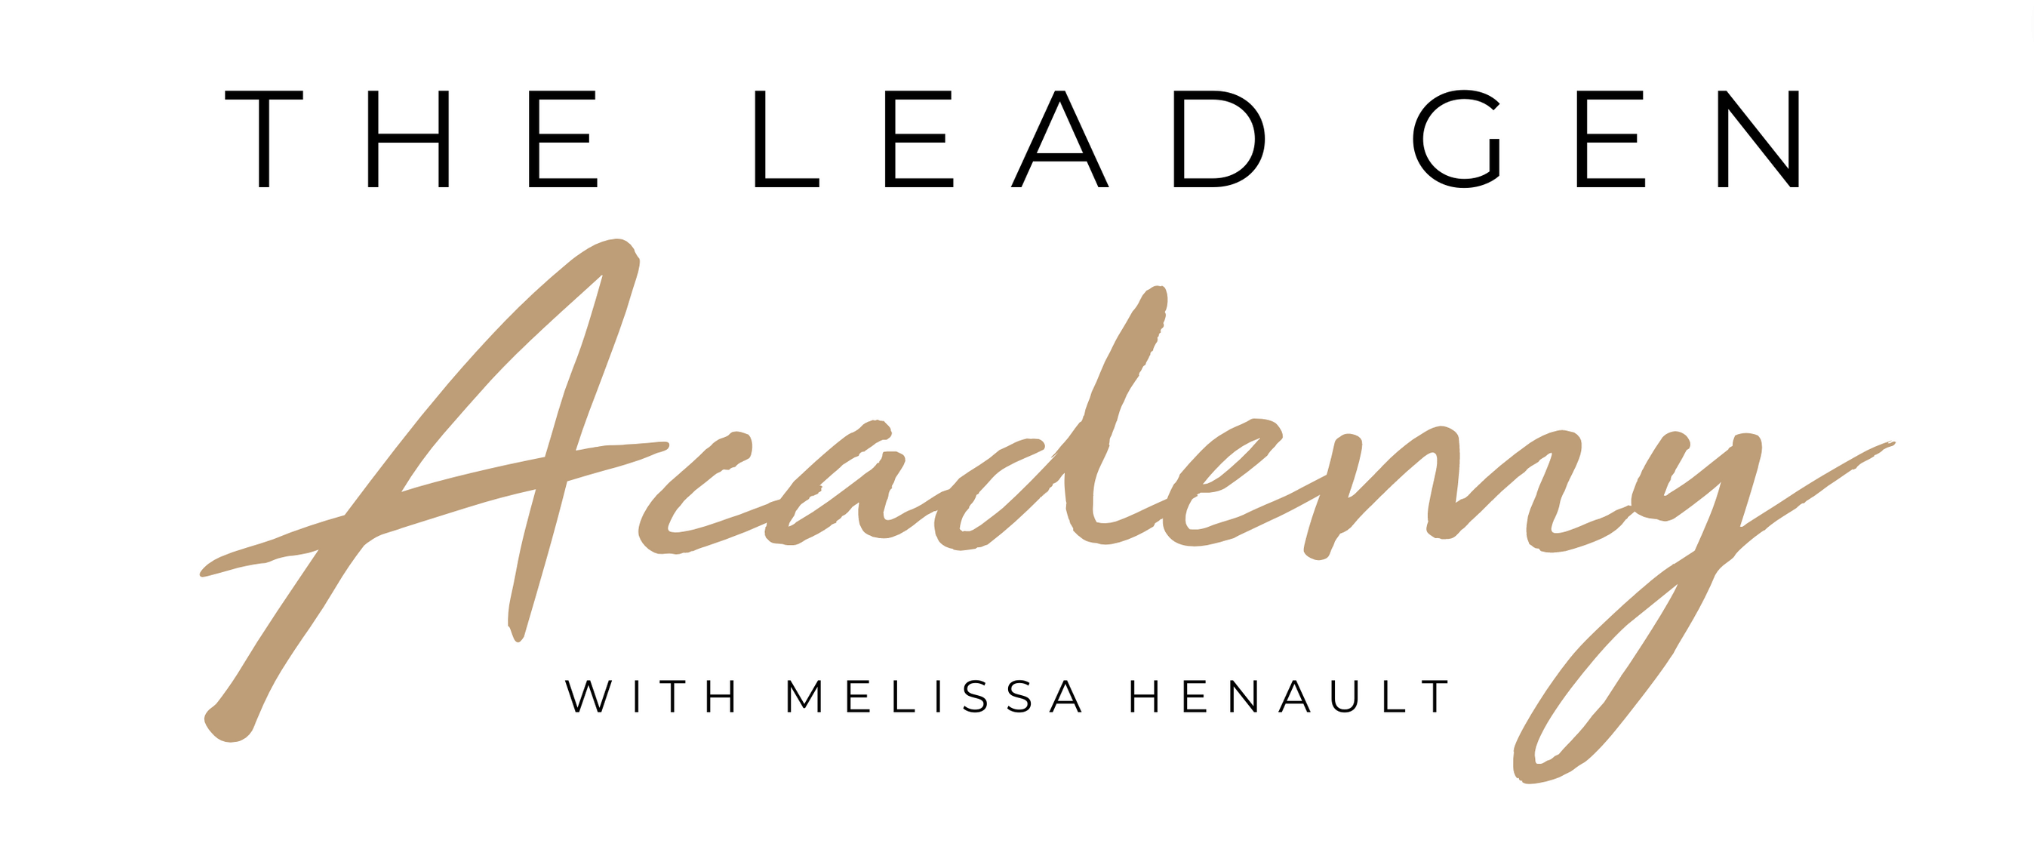 The Lead Gen Academy By Melissa Henault - Free Download Course